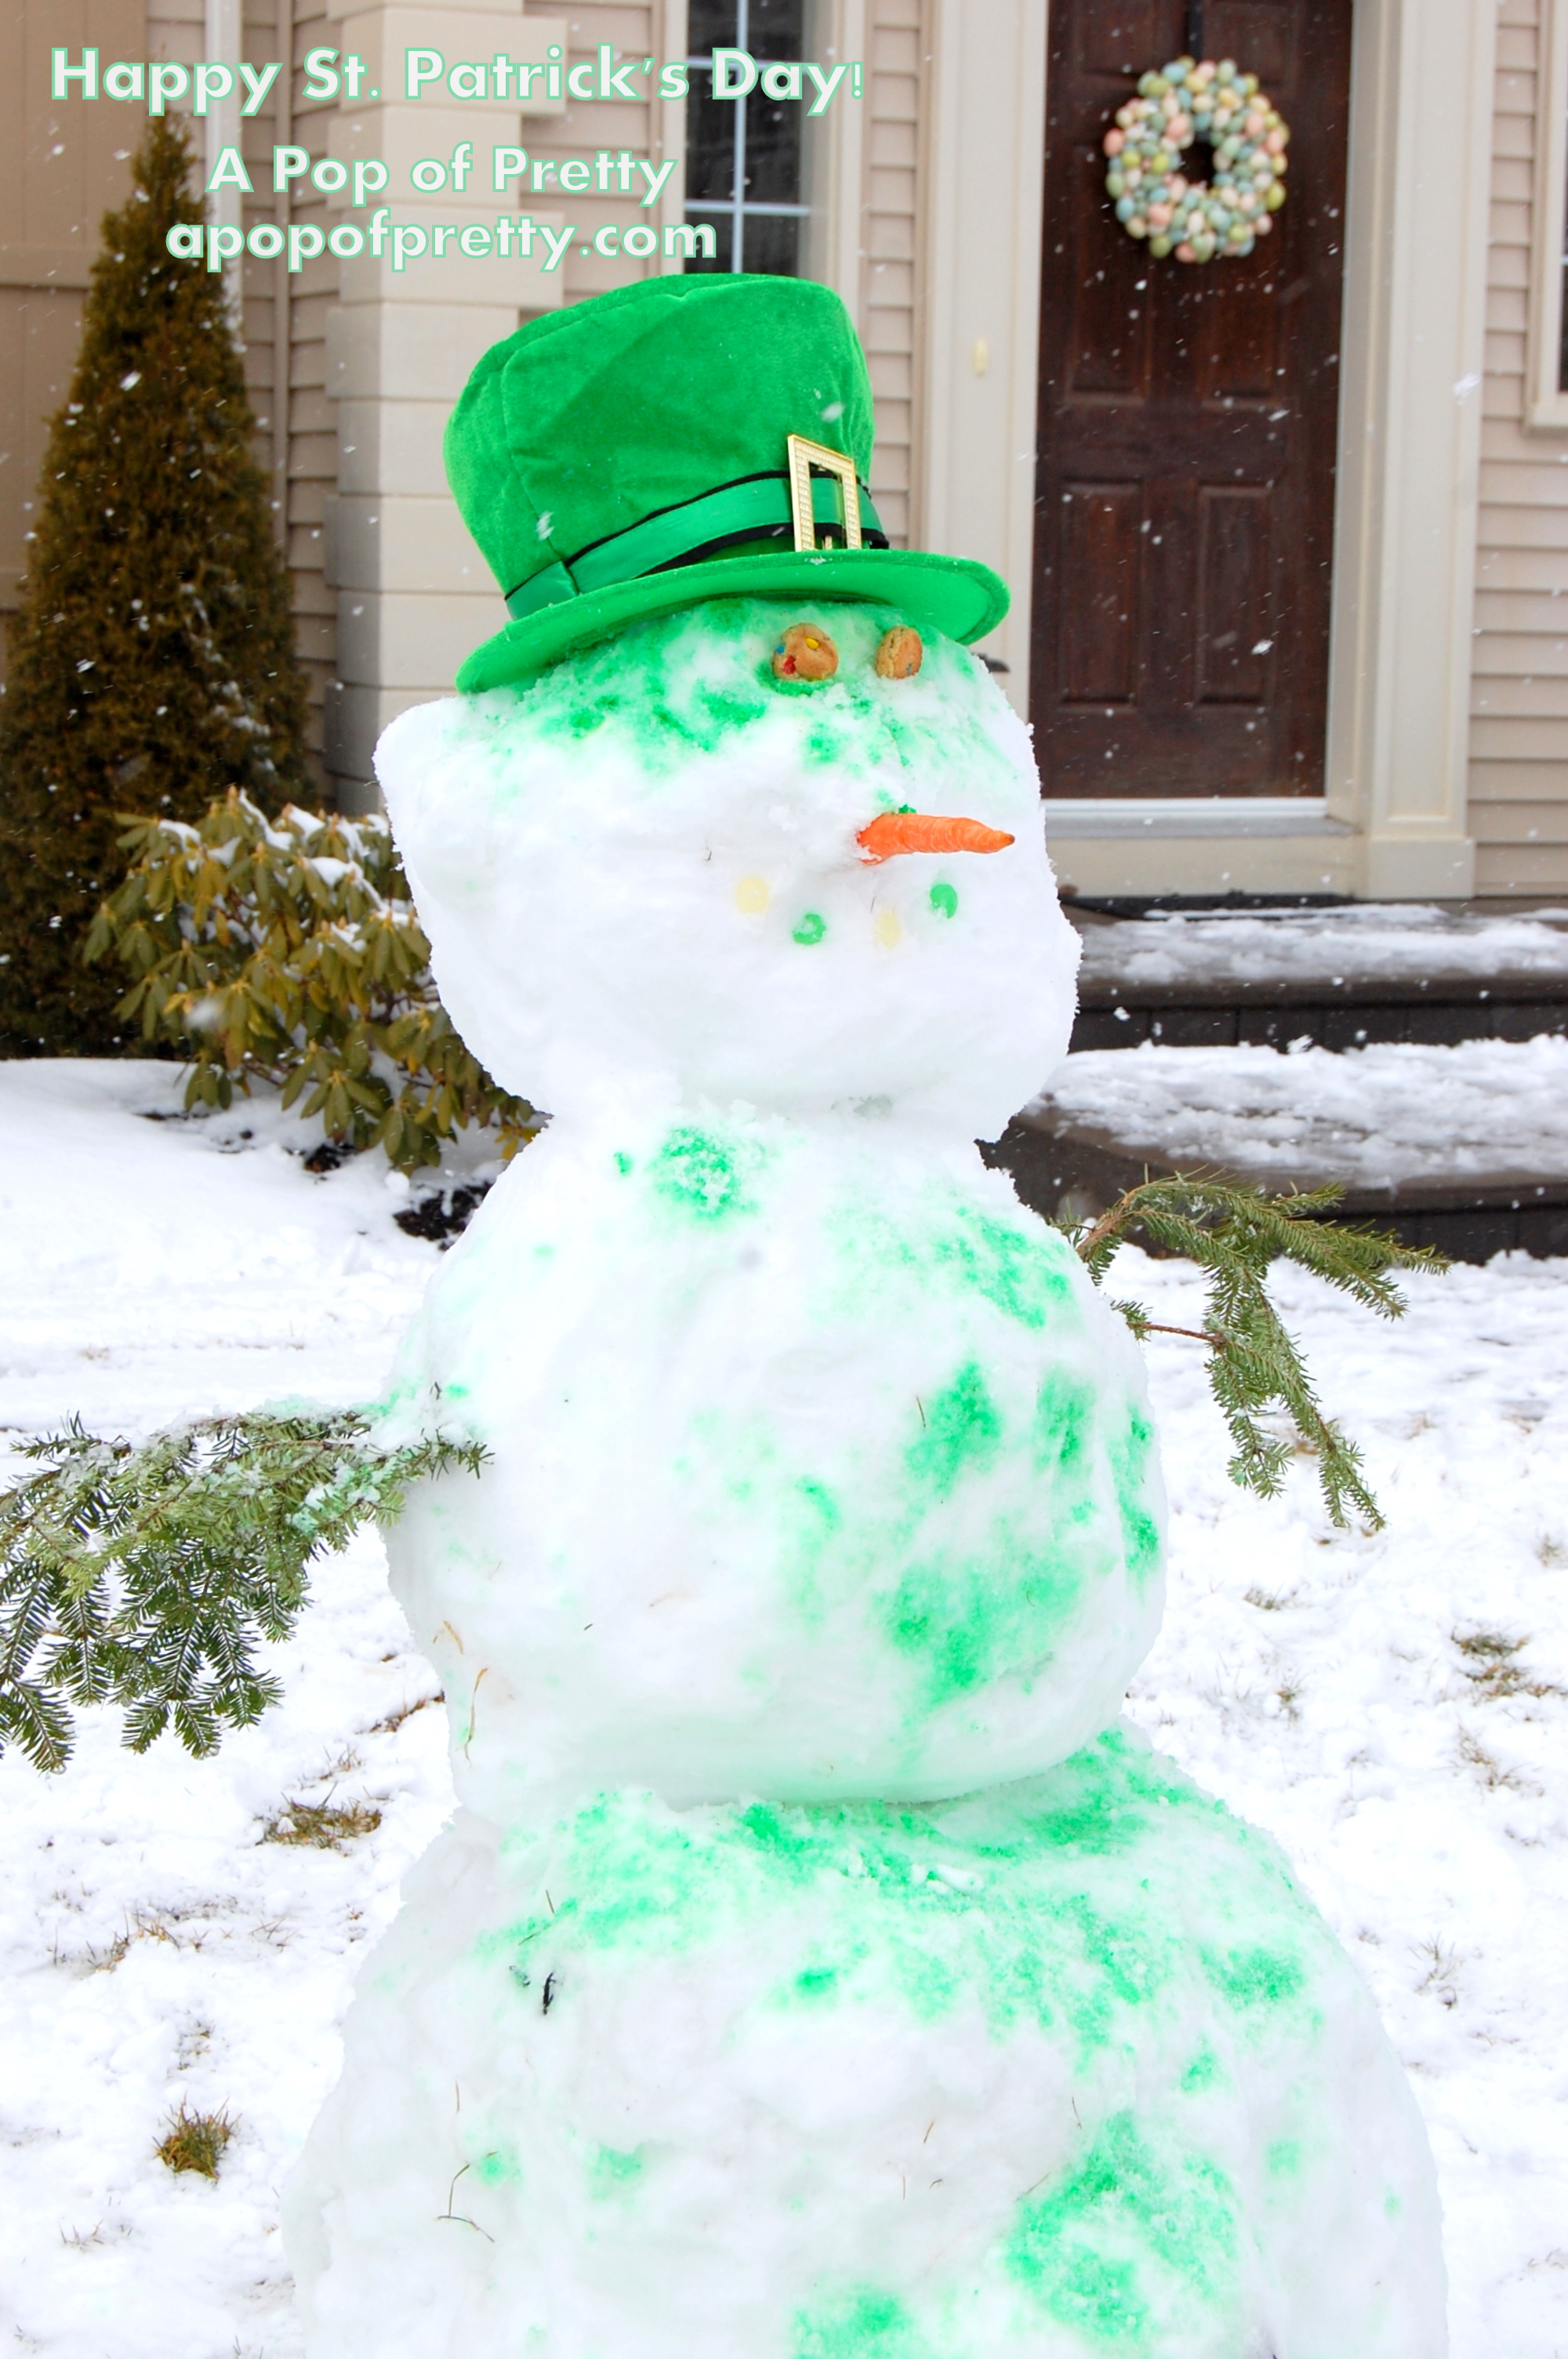 Celebrating with a Green Snowman (St. Patrick’s Day)